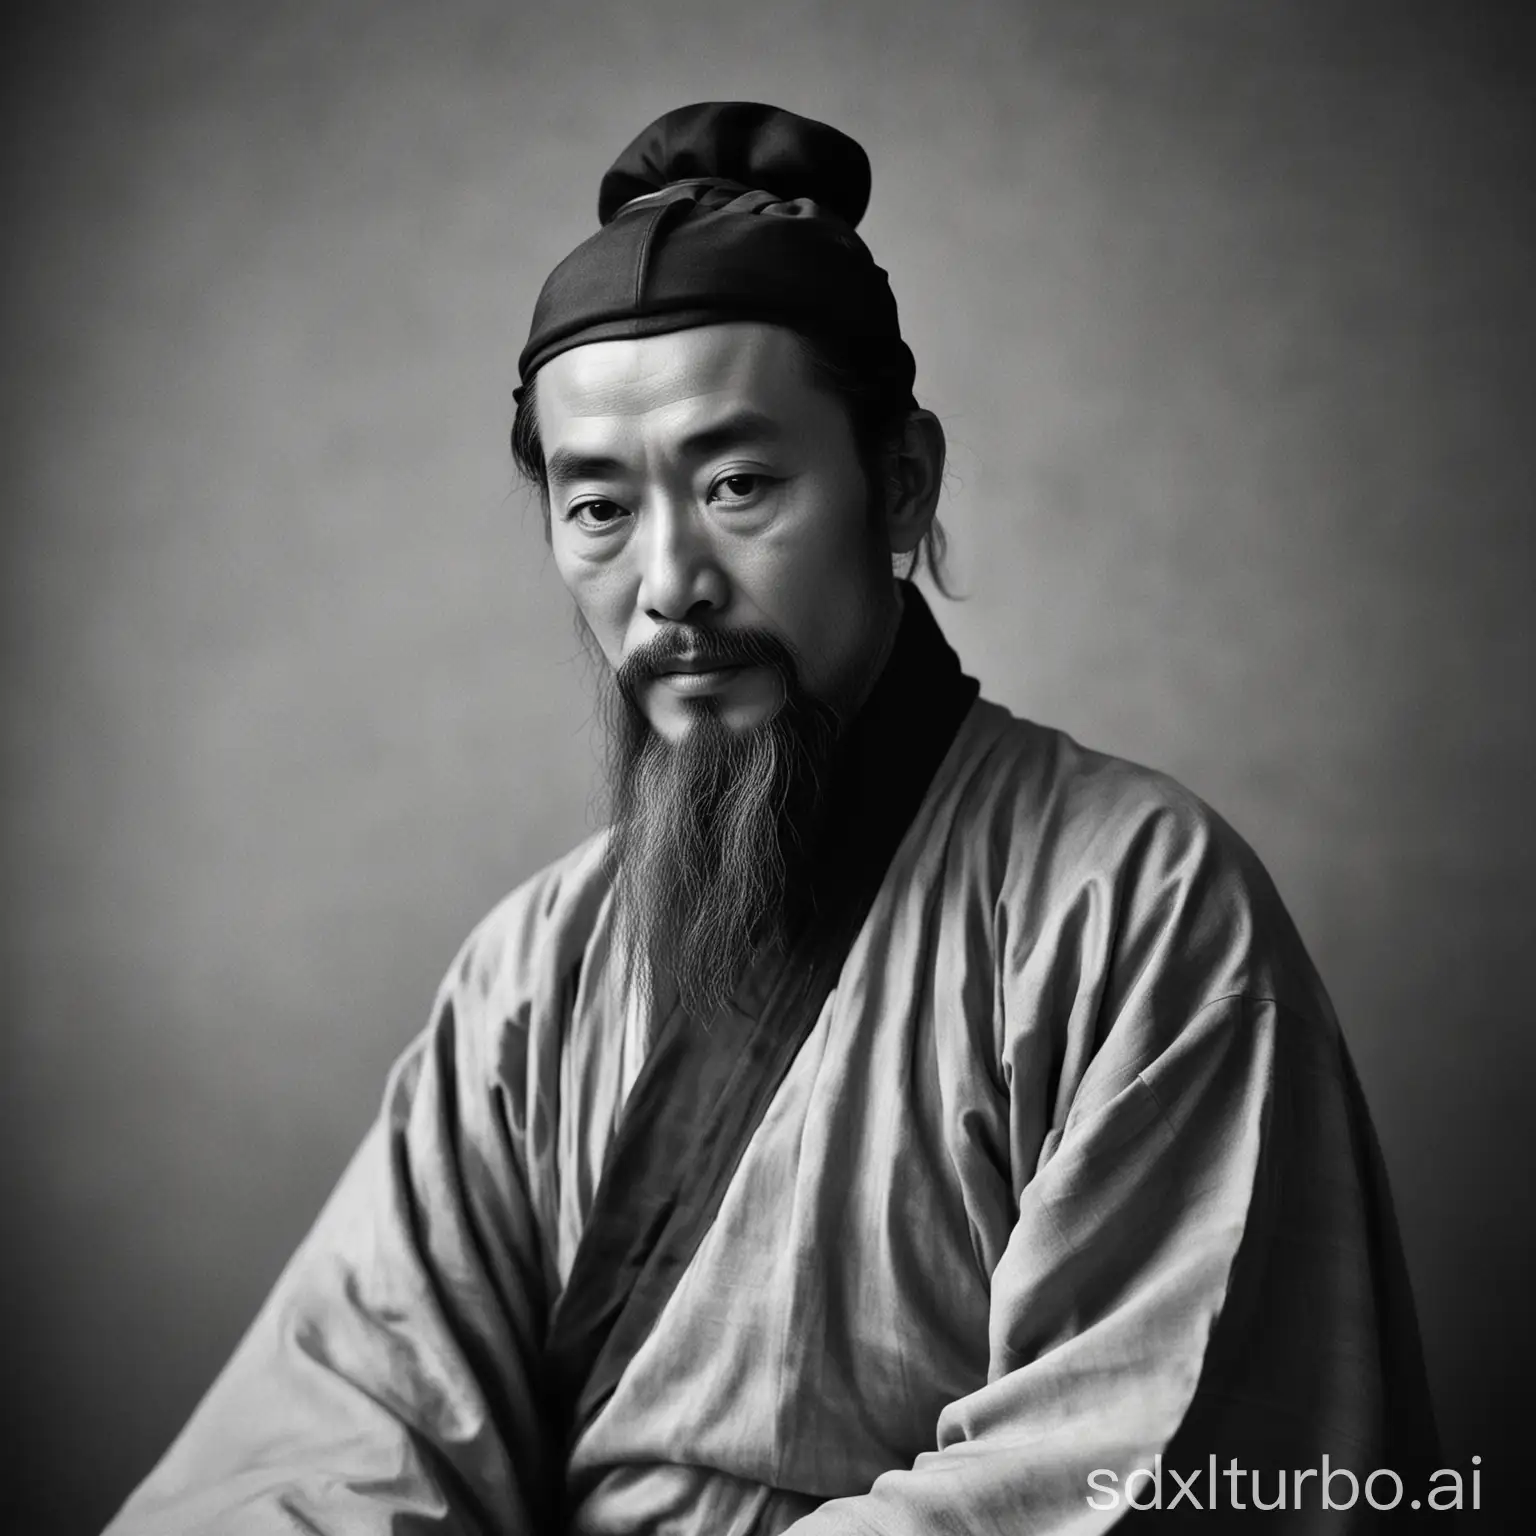 Tang Dynasty poet Li Bai's black and white portrait, captured in a documentary photography style.